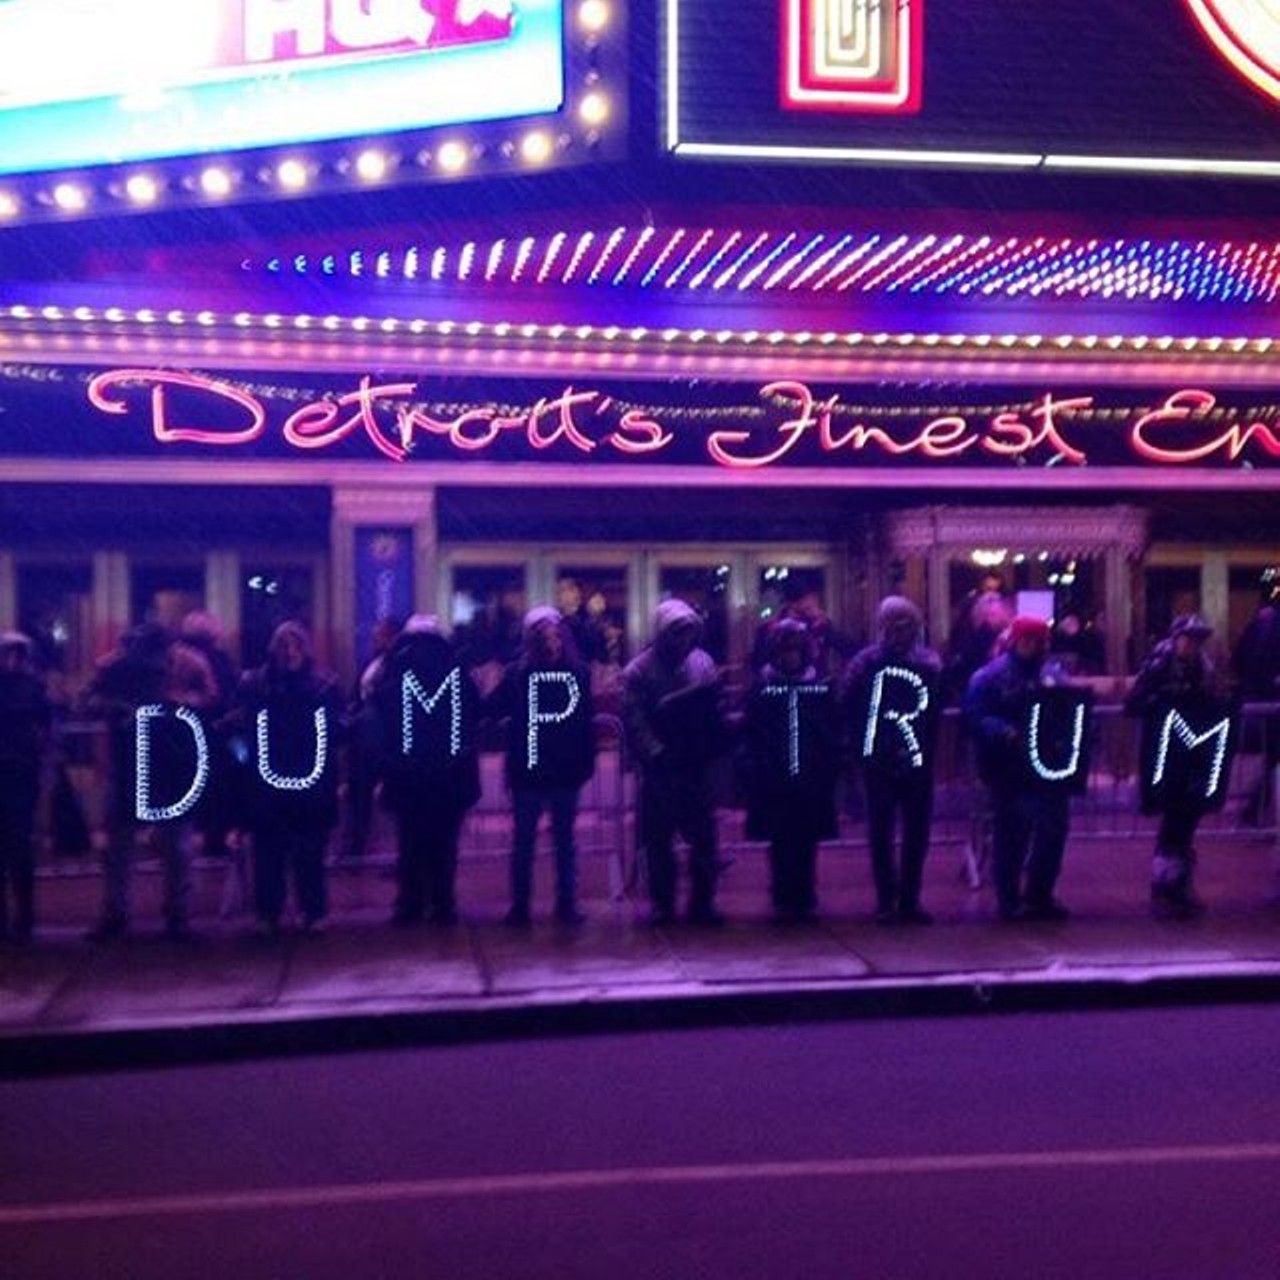 The message &#147;dump Trump&#148; echoed loud and clear along the street, uniting protesters against a common enemy. Photo via Instagram user @nyjusticeleague